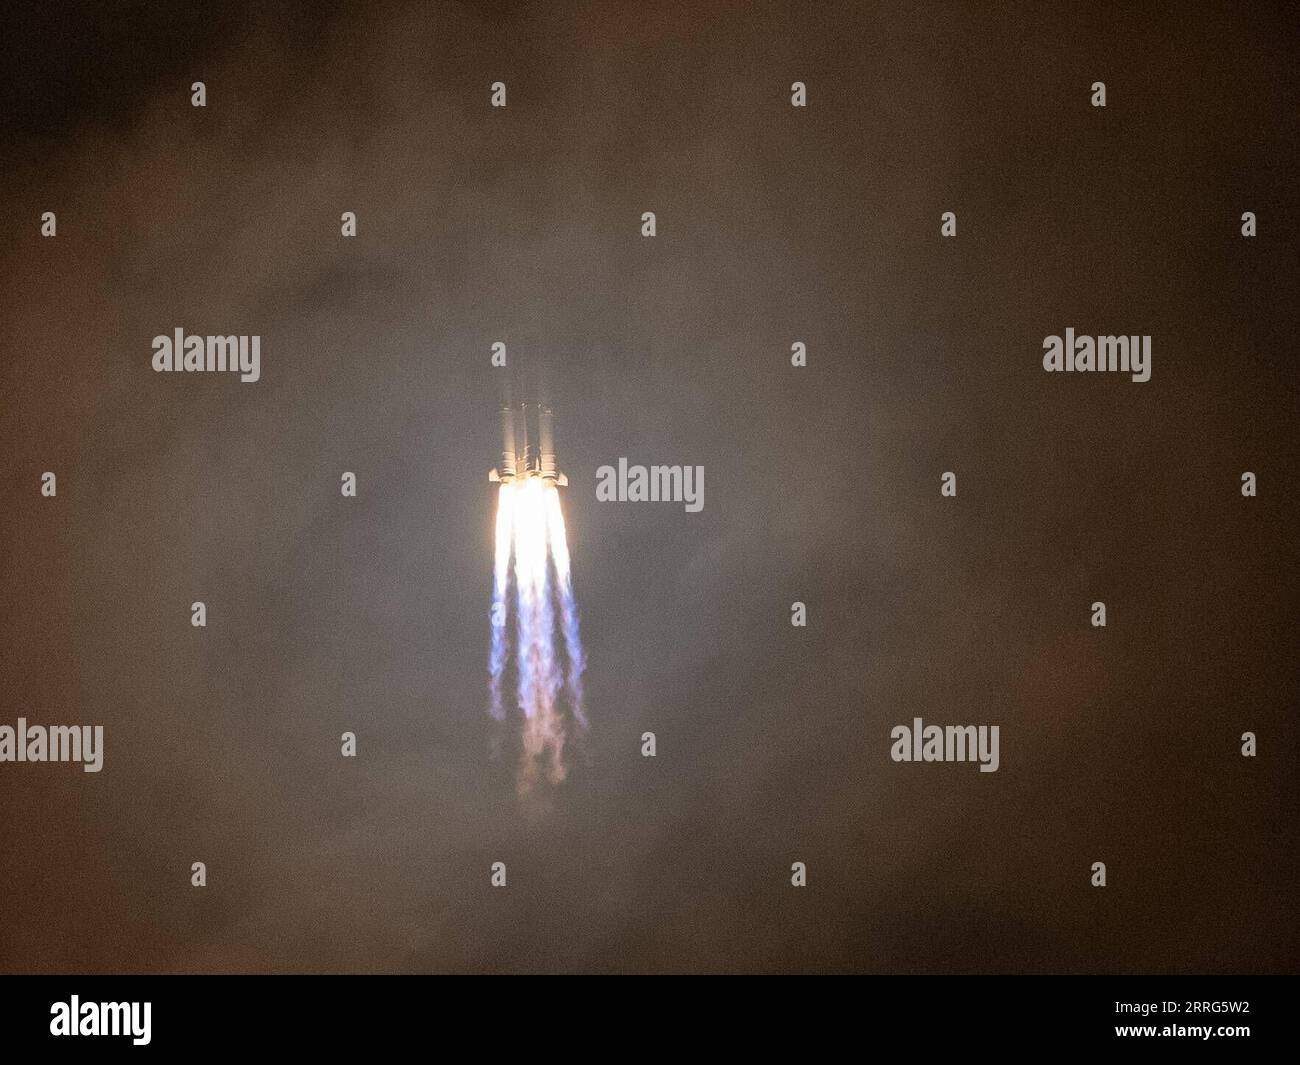 220510 -- WENCHANG, May 10, 2022 -- The Long March-7 Y5 rocket, carrying Tianzhou-4, blasts off from the Wenchang Spacecraft Launch Site in south China s Hainan Province, May 10, 2022. China launched cargo spacecraft Tianzhou-4 on Tuesday to deliver supplies for its space station which is scheduled to wrap up construction this year.  EyesonSciCHINA-HAINAN-TIANZHOU-4-CARGO SPACECRAFT-LAUNCH CN HuxZhixuan PUBLICATIONxNOTxINxCHN Stock Photo